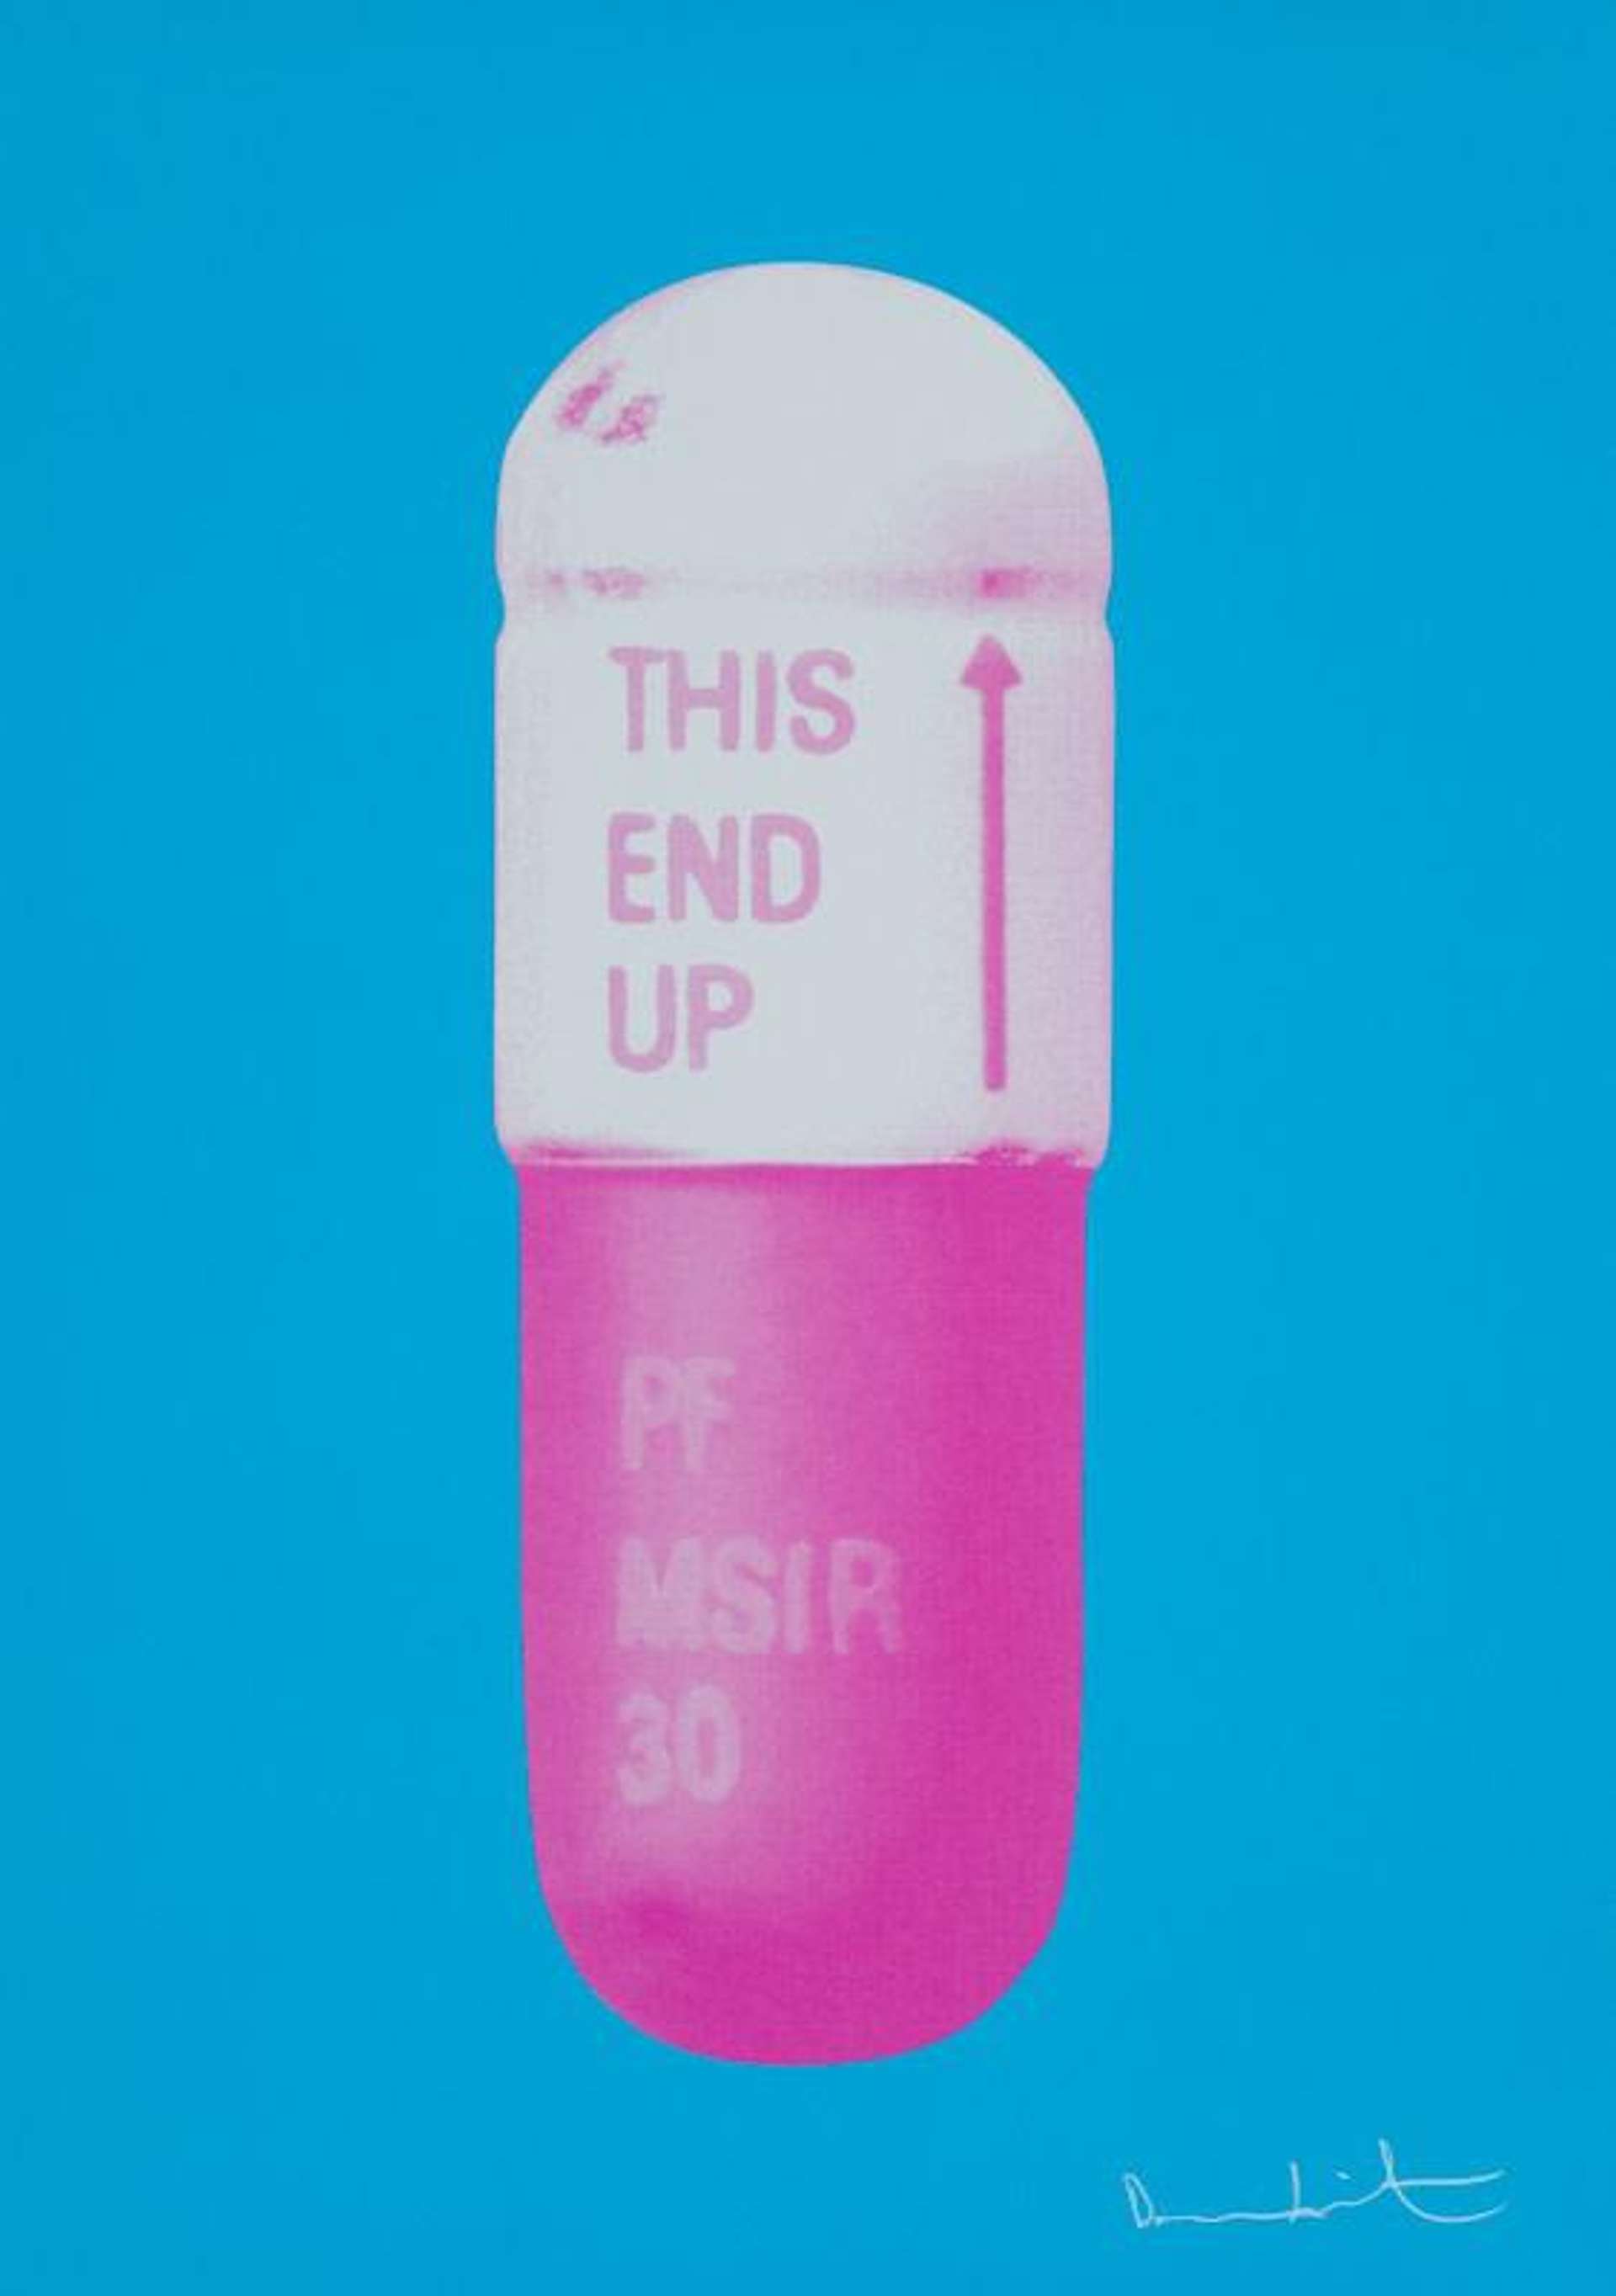 The Cure (vivid Blue, cloudy pink, candy floss pink) by Damien Hirst